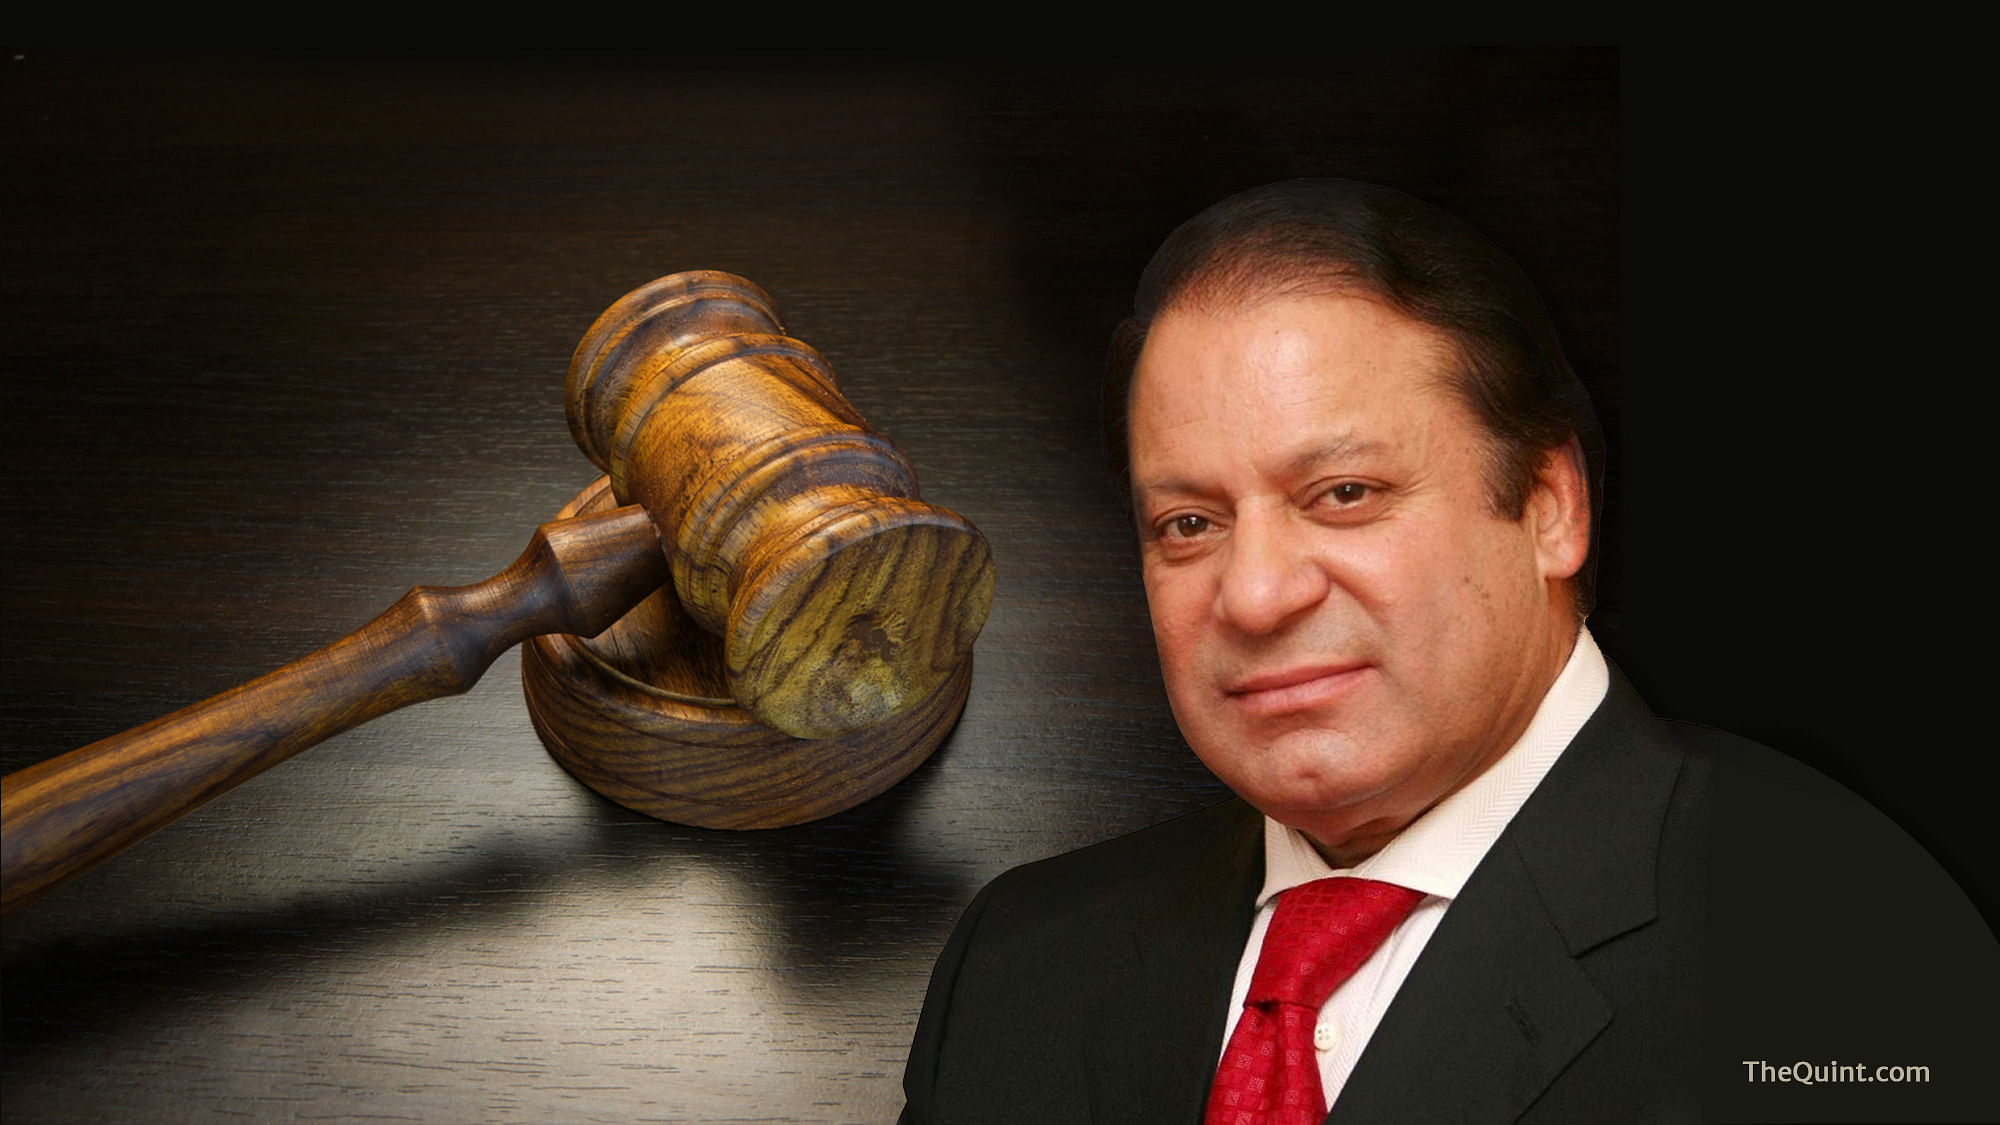 Pakistan has announced that it will request the British government to deport former prime minister Nawaz Sharif as he is an “absconder”.